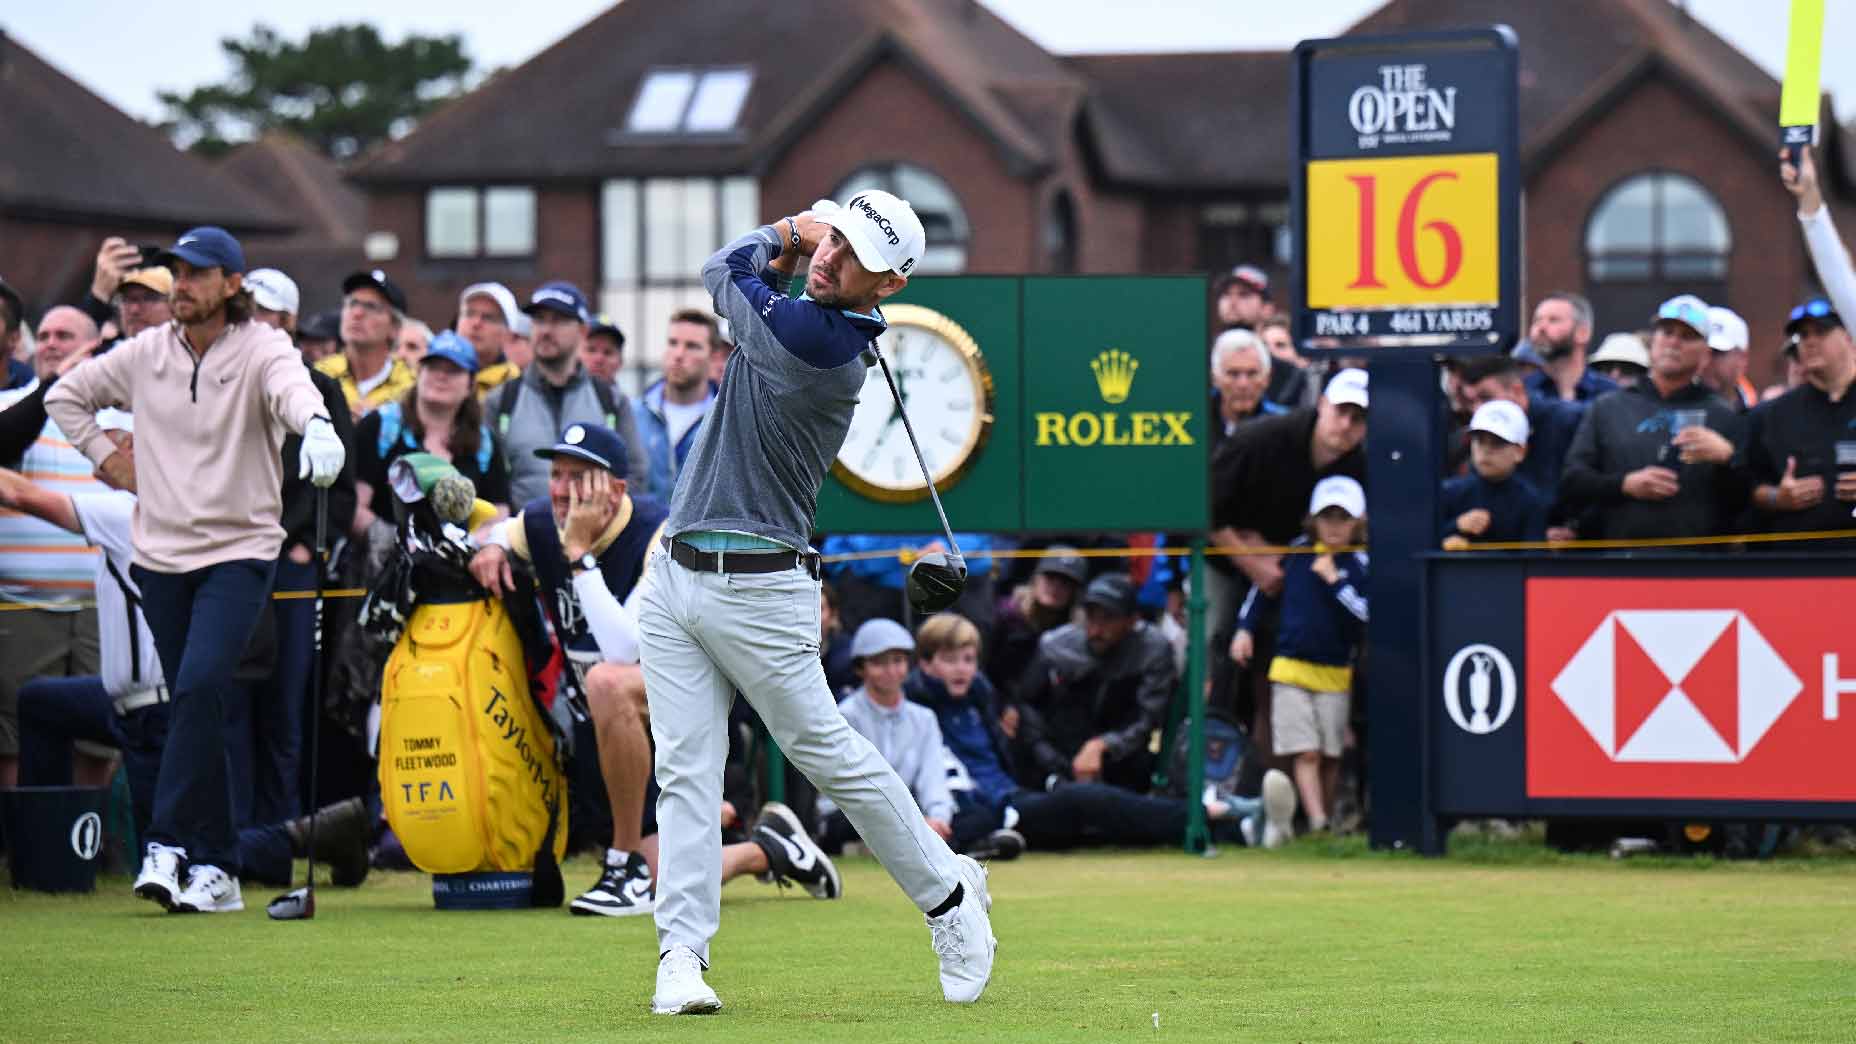 2023 Open Championship How to watch Sundays Round 4 on TV